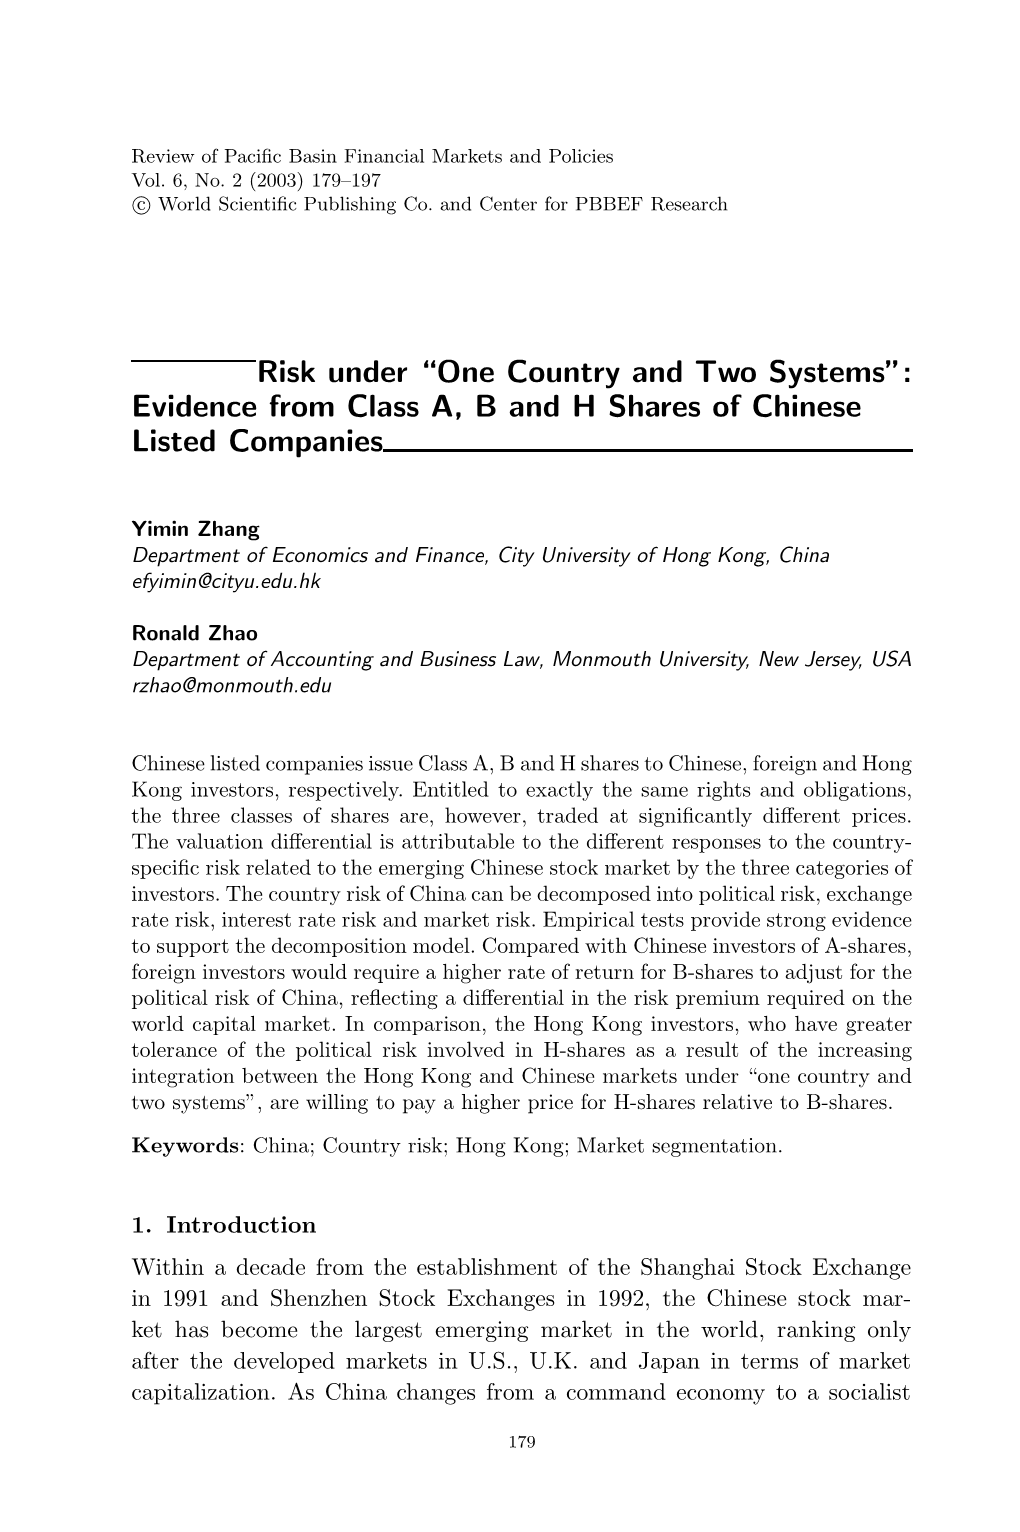 Risk Under “One Country and Two Systems”: Evidence from Class A, B and H Shares of Chinese Listed Companies